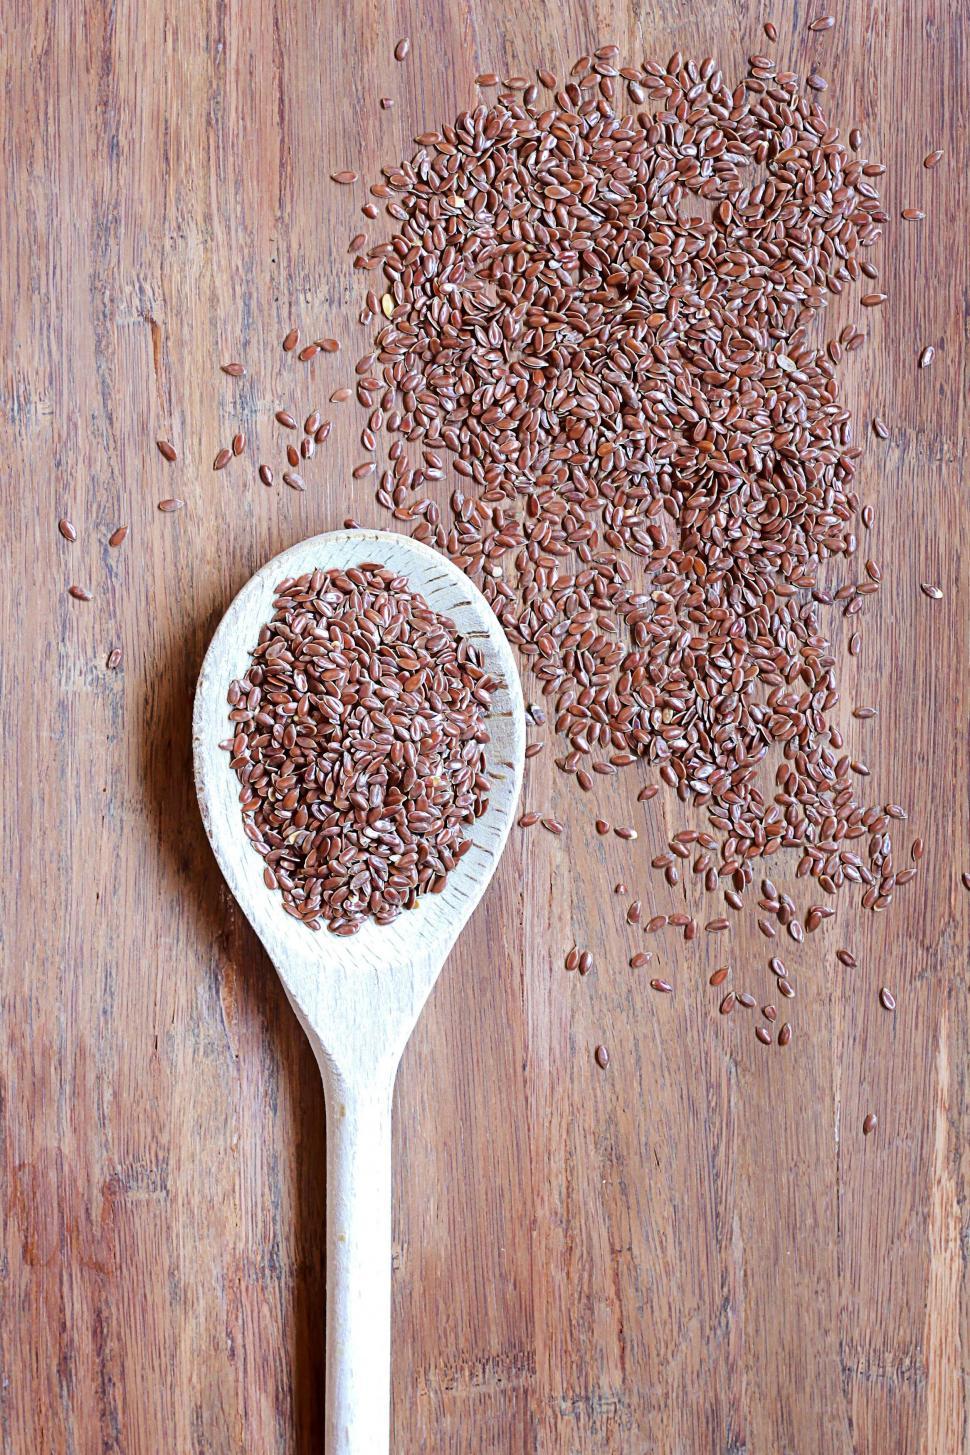 Free Image of Wooden spoon with flax seeds on table 